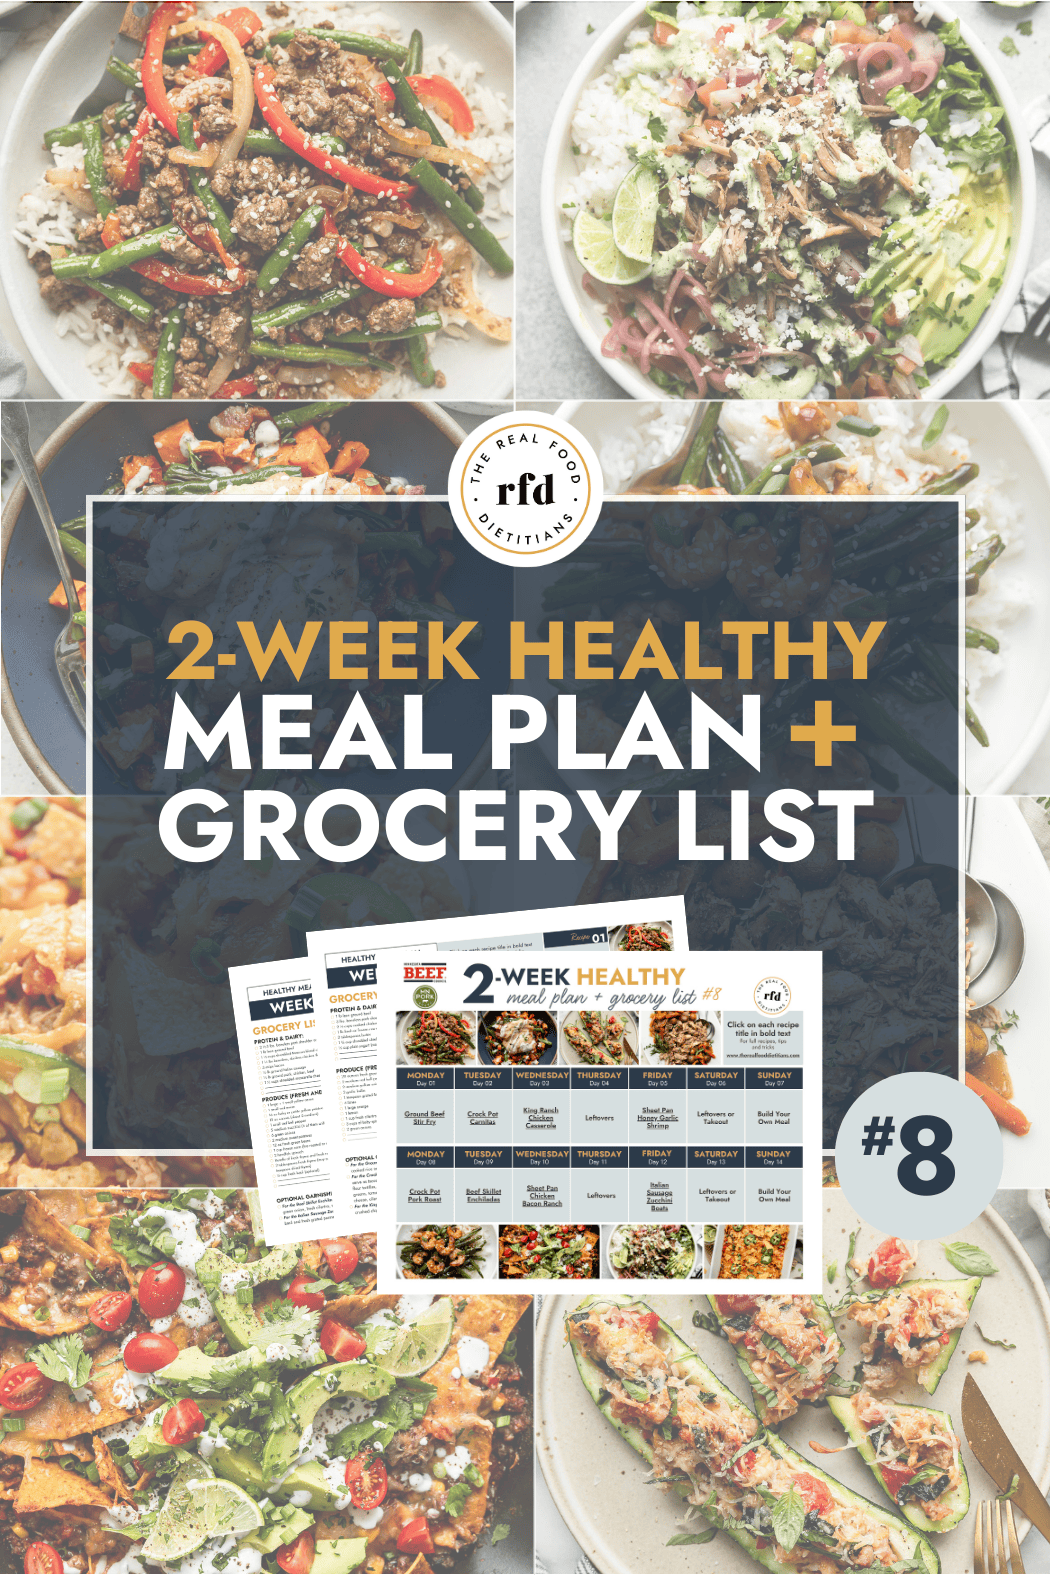 2-Week Healthy Meal Plan #8 with Grocery List - Page 3 of 4 - The Real ...